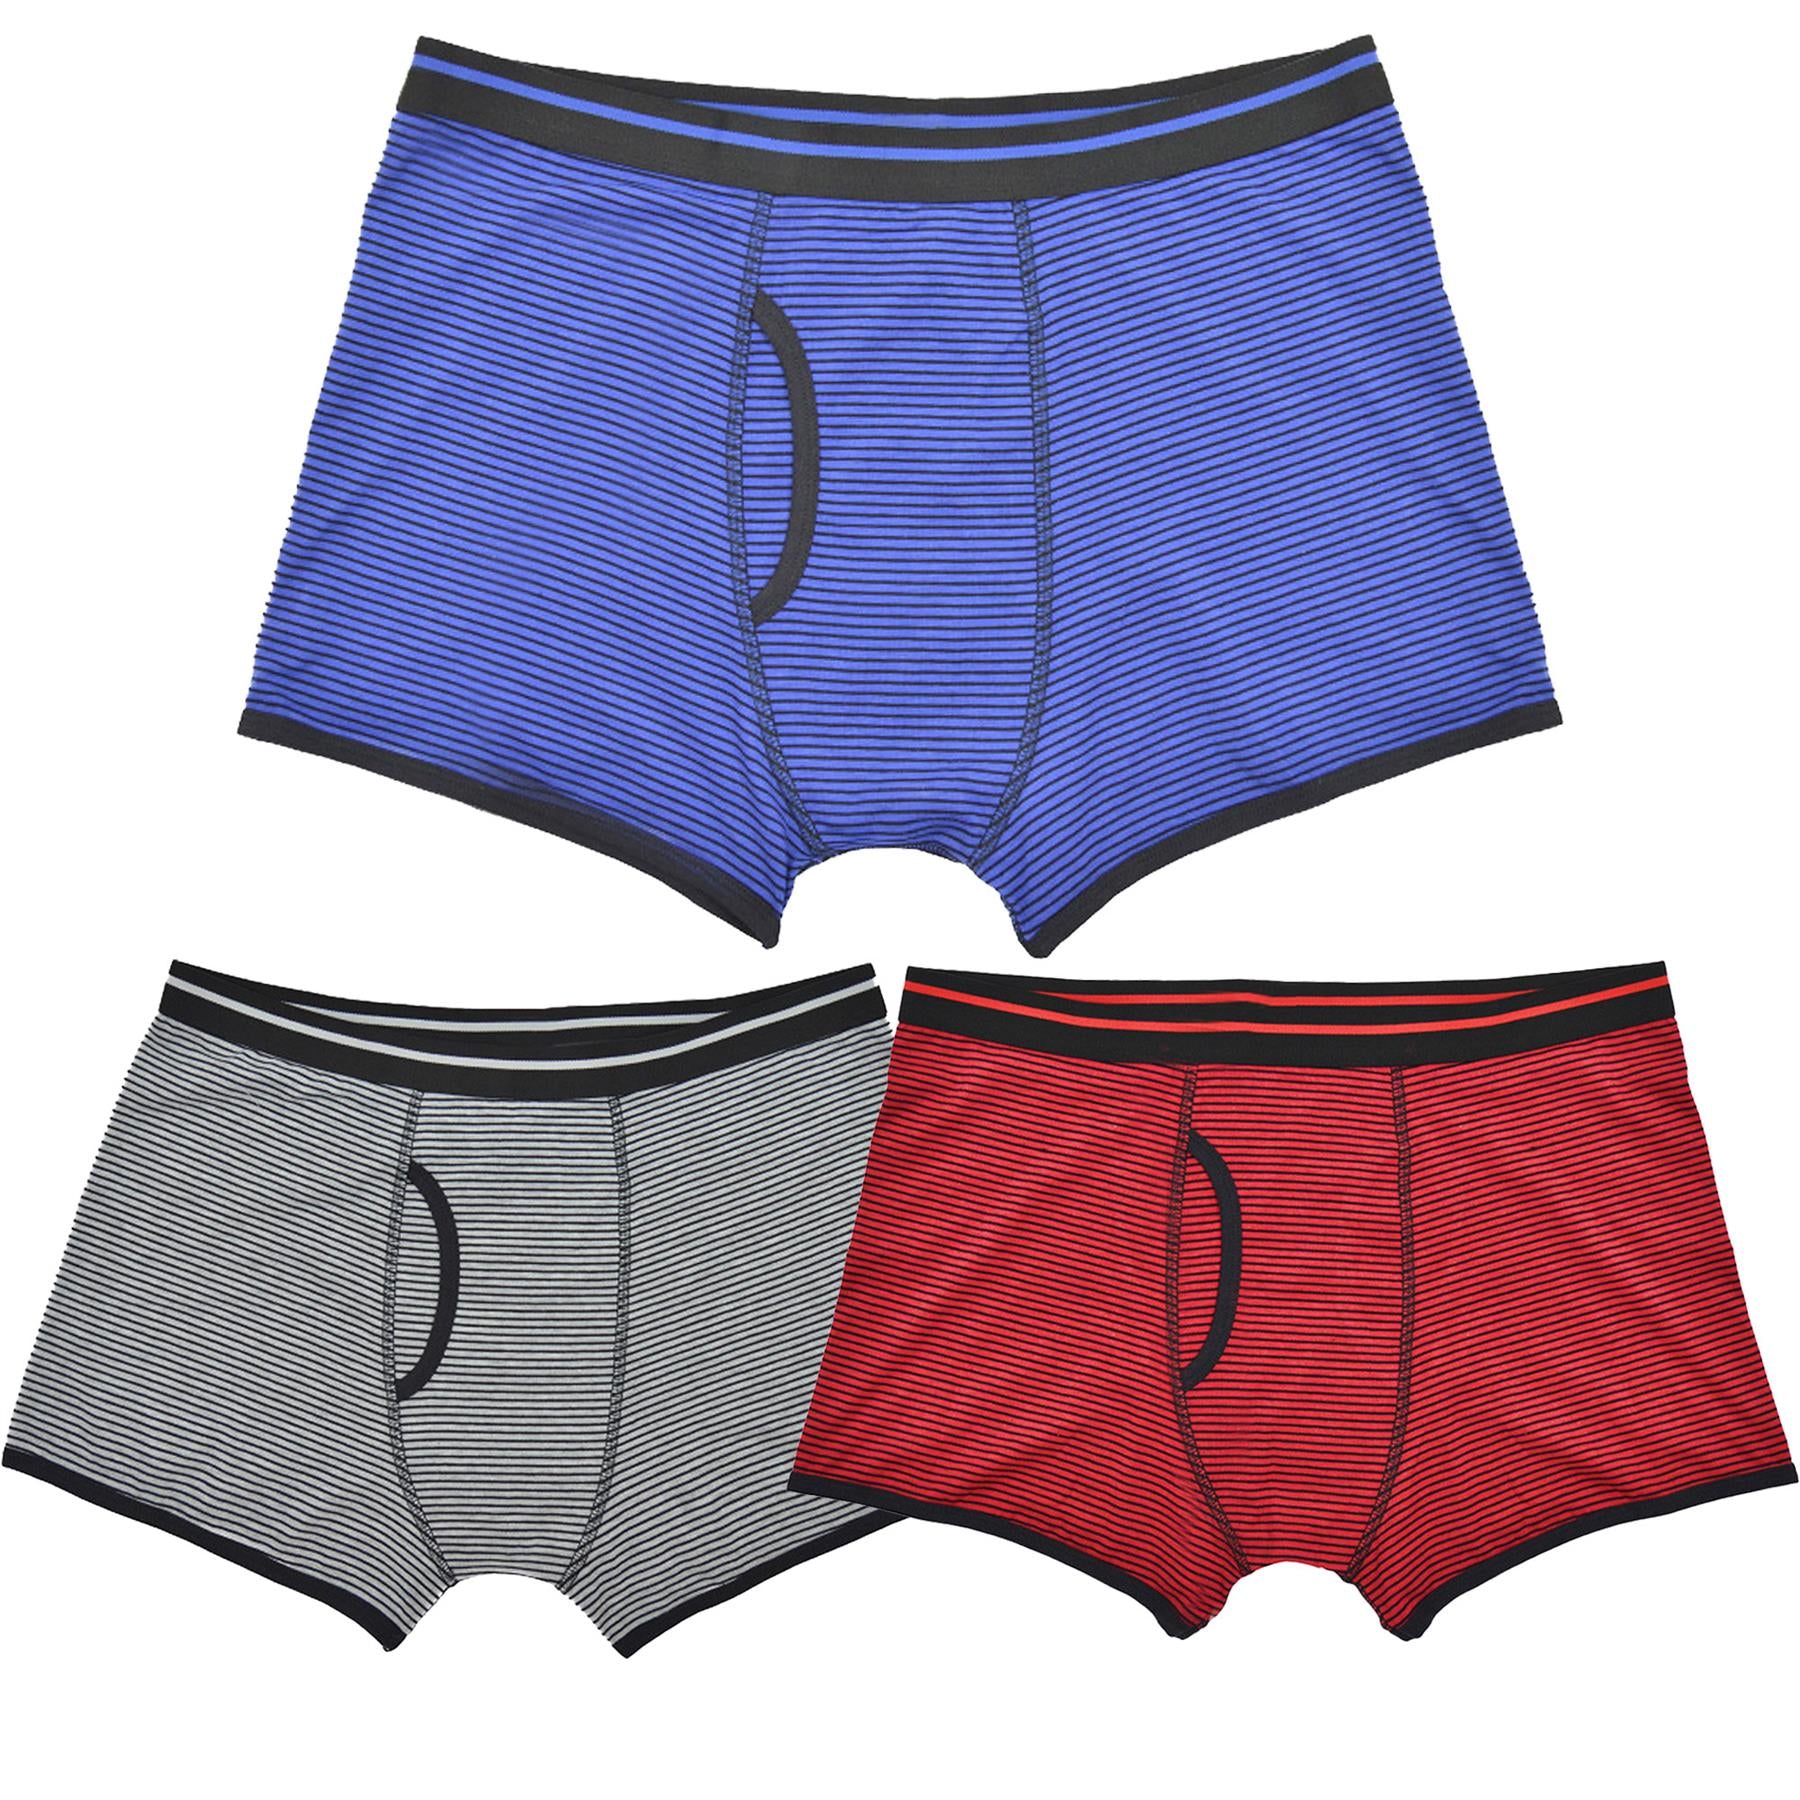 A2Z Mens Narrow Stripe Stretch Trunks Pack Of 3 Knickers Elasticated Waistband